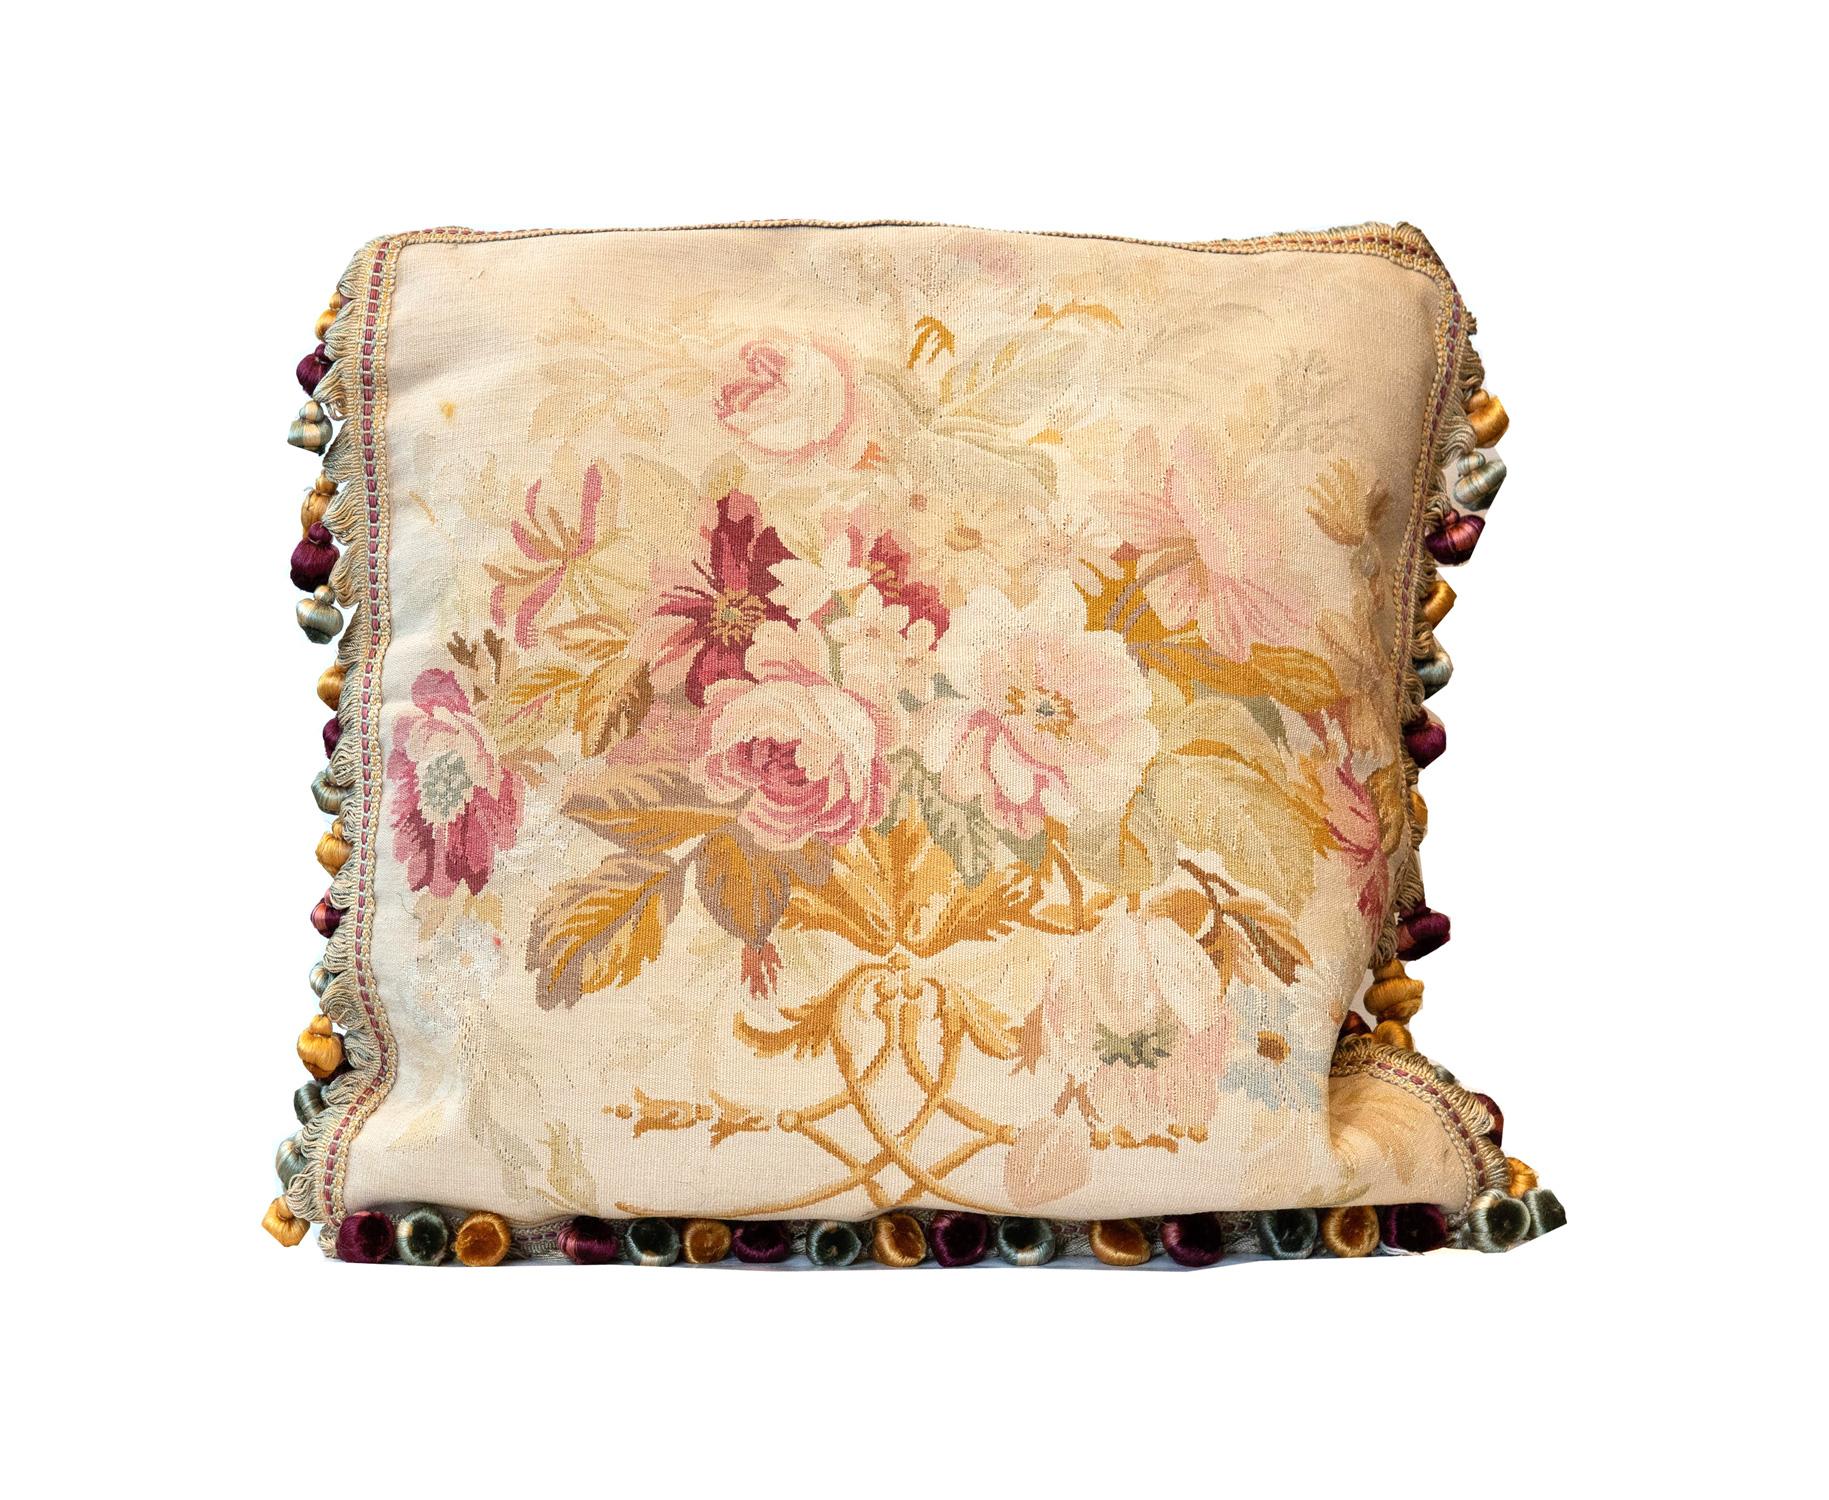 These cushions are fine examples of needlepoints from the 1990s, constructed in china with the traditional French Aubusson style and technique. These Aubusson style cushions feature a floral design in the centre woven in accents of pink, beige,